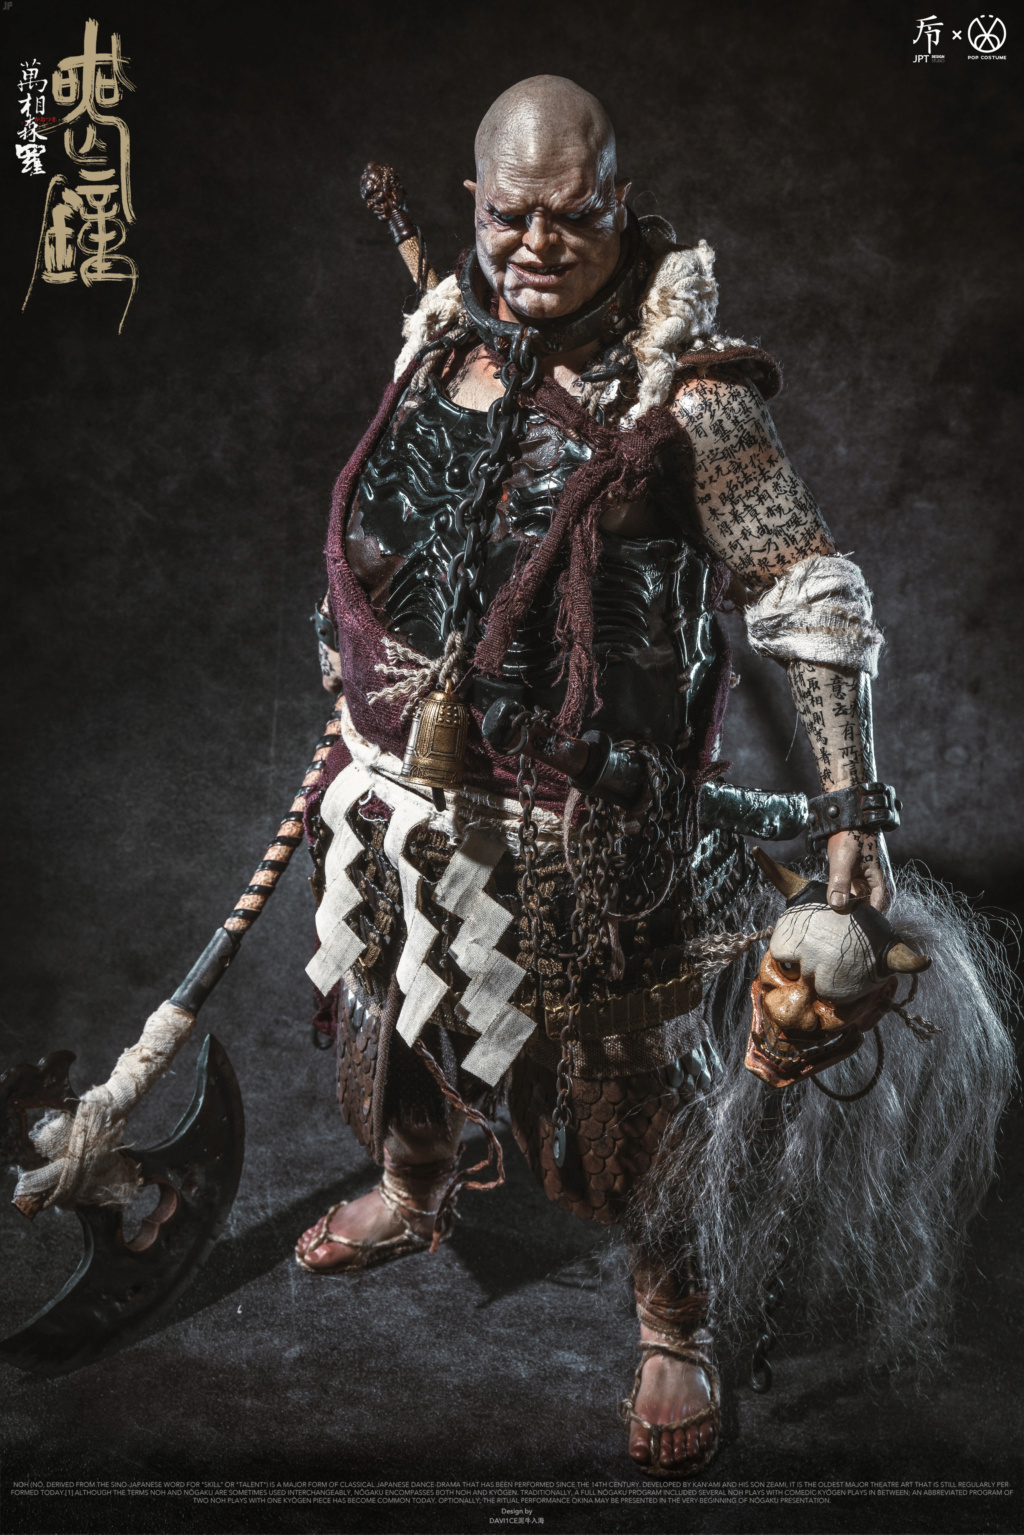 JPTDesign - NEW PRODUCT: JPT Design & POP COSTUME: JPT-008 1/6 Scale KNELL (2 Styles) 66d79210